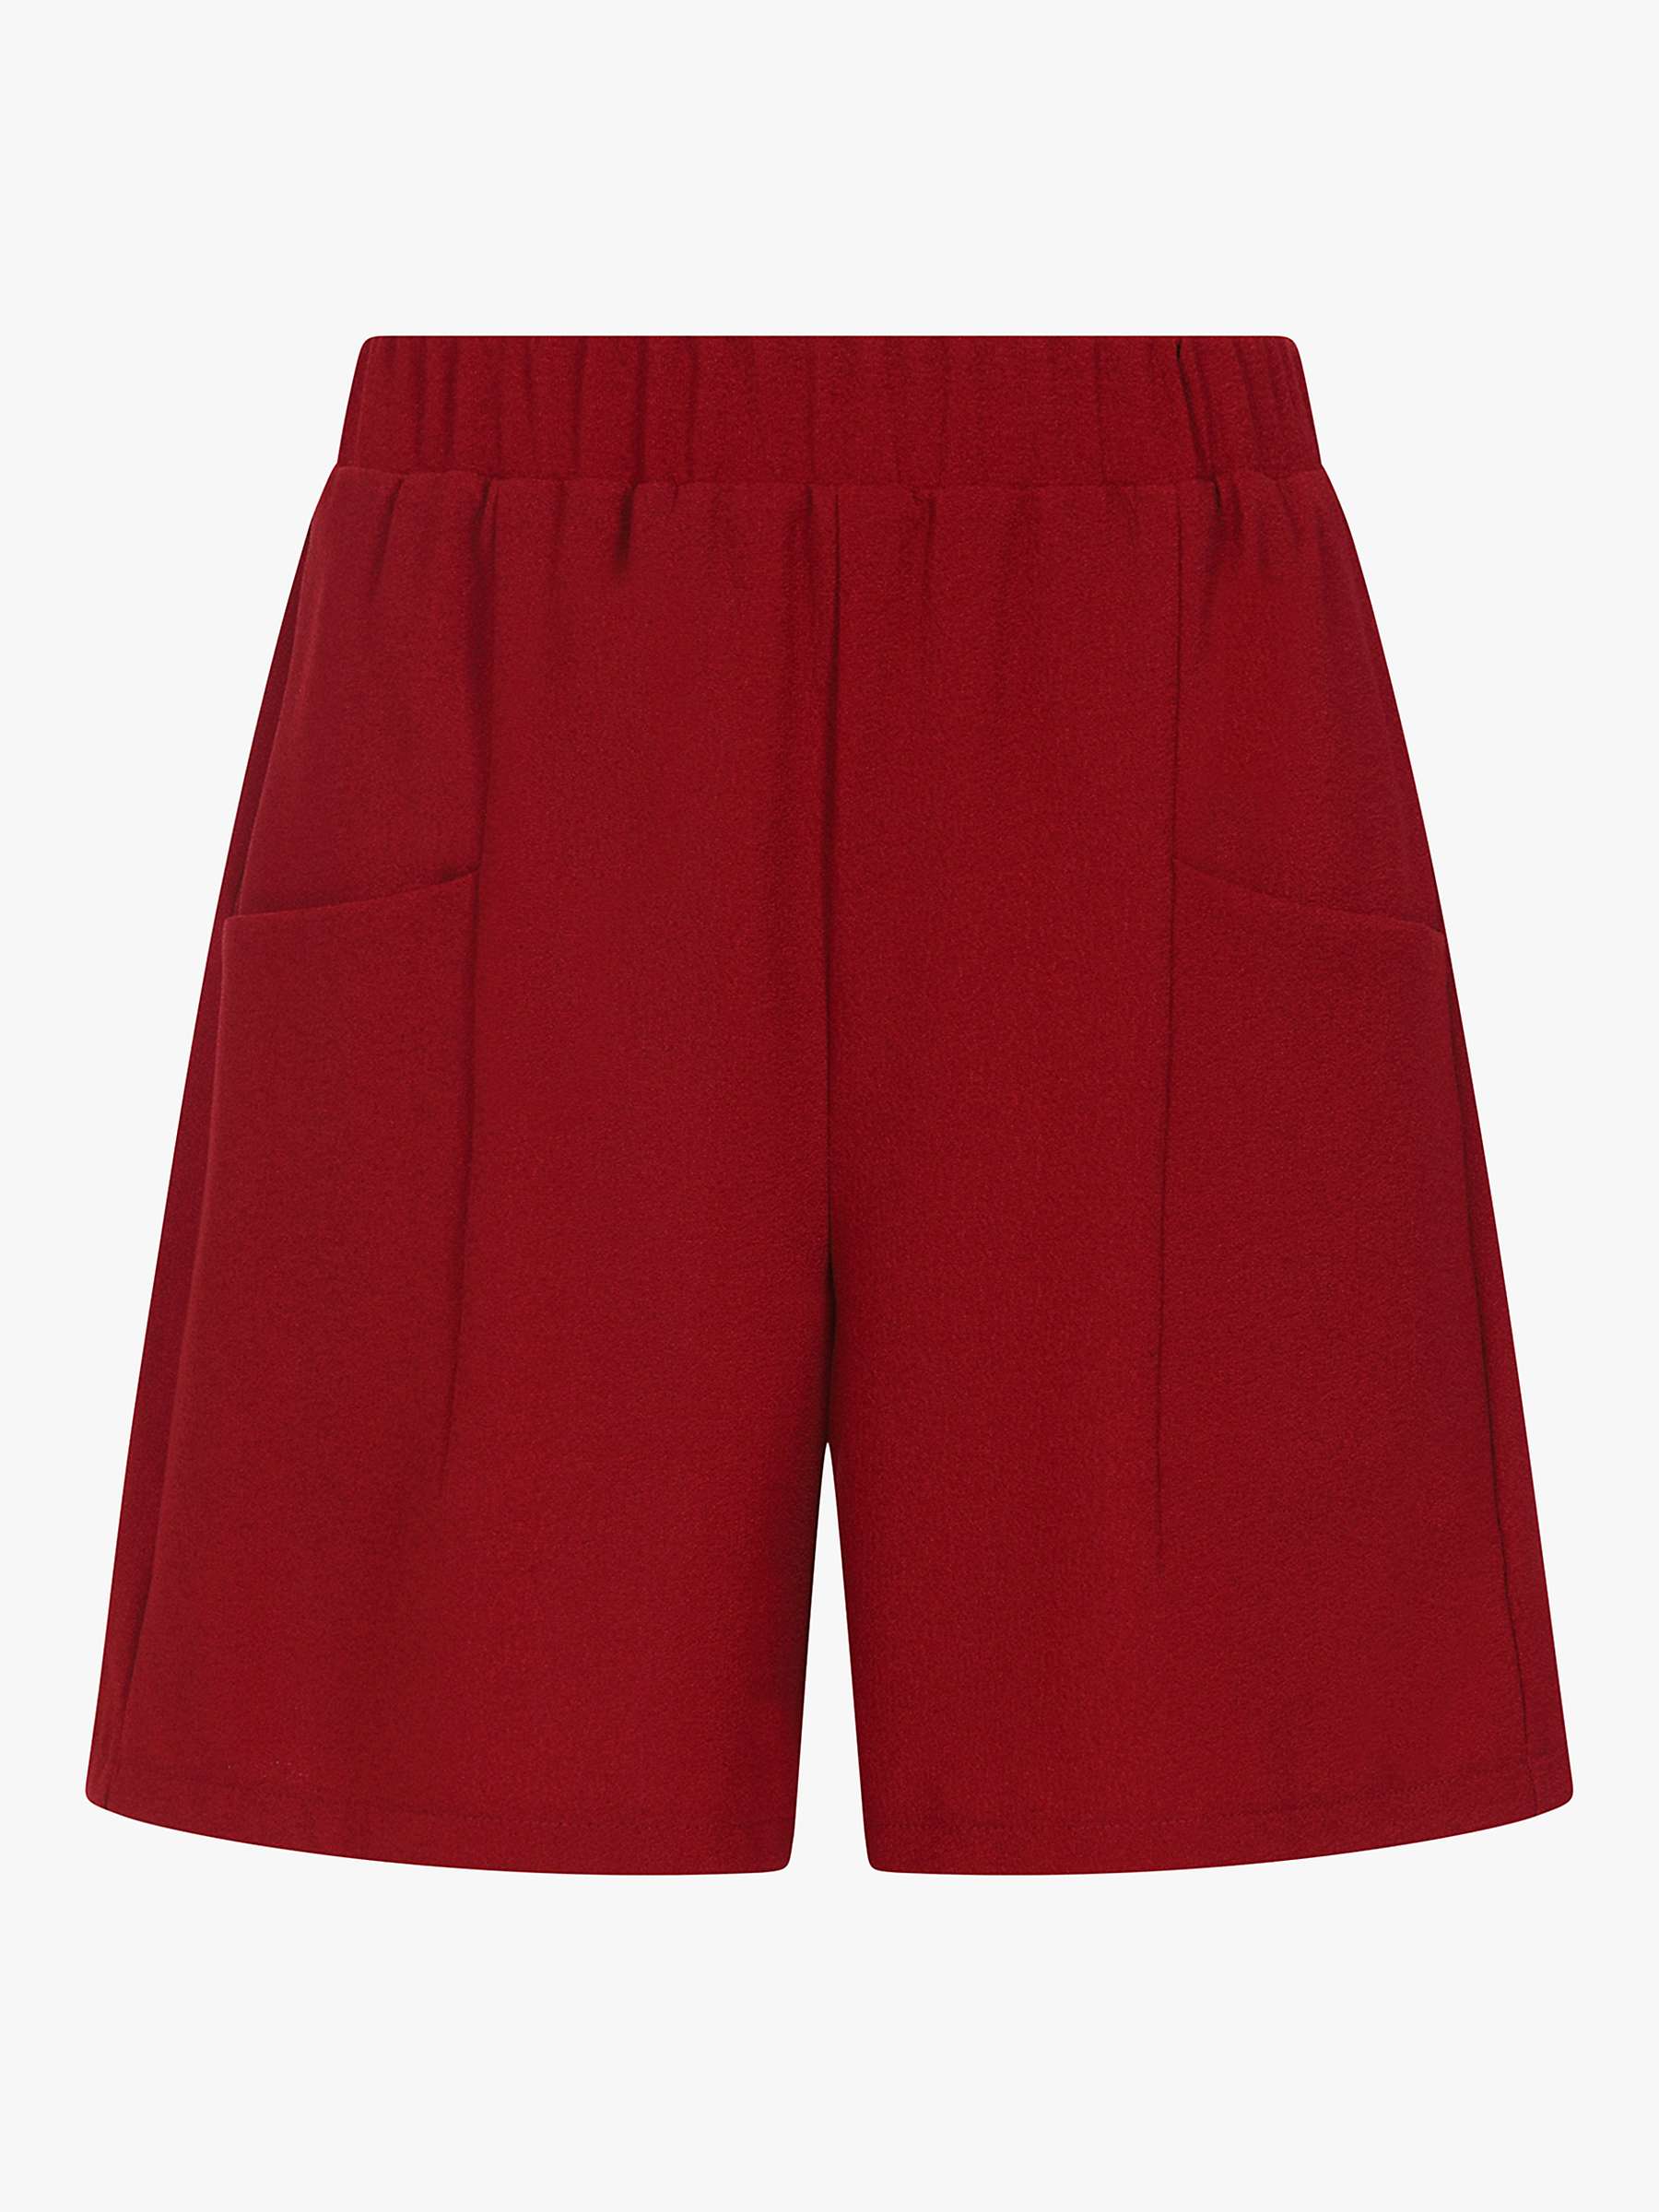 Buy HotSquash Luxe Crepe Shorts Online at johnlewis.com